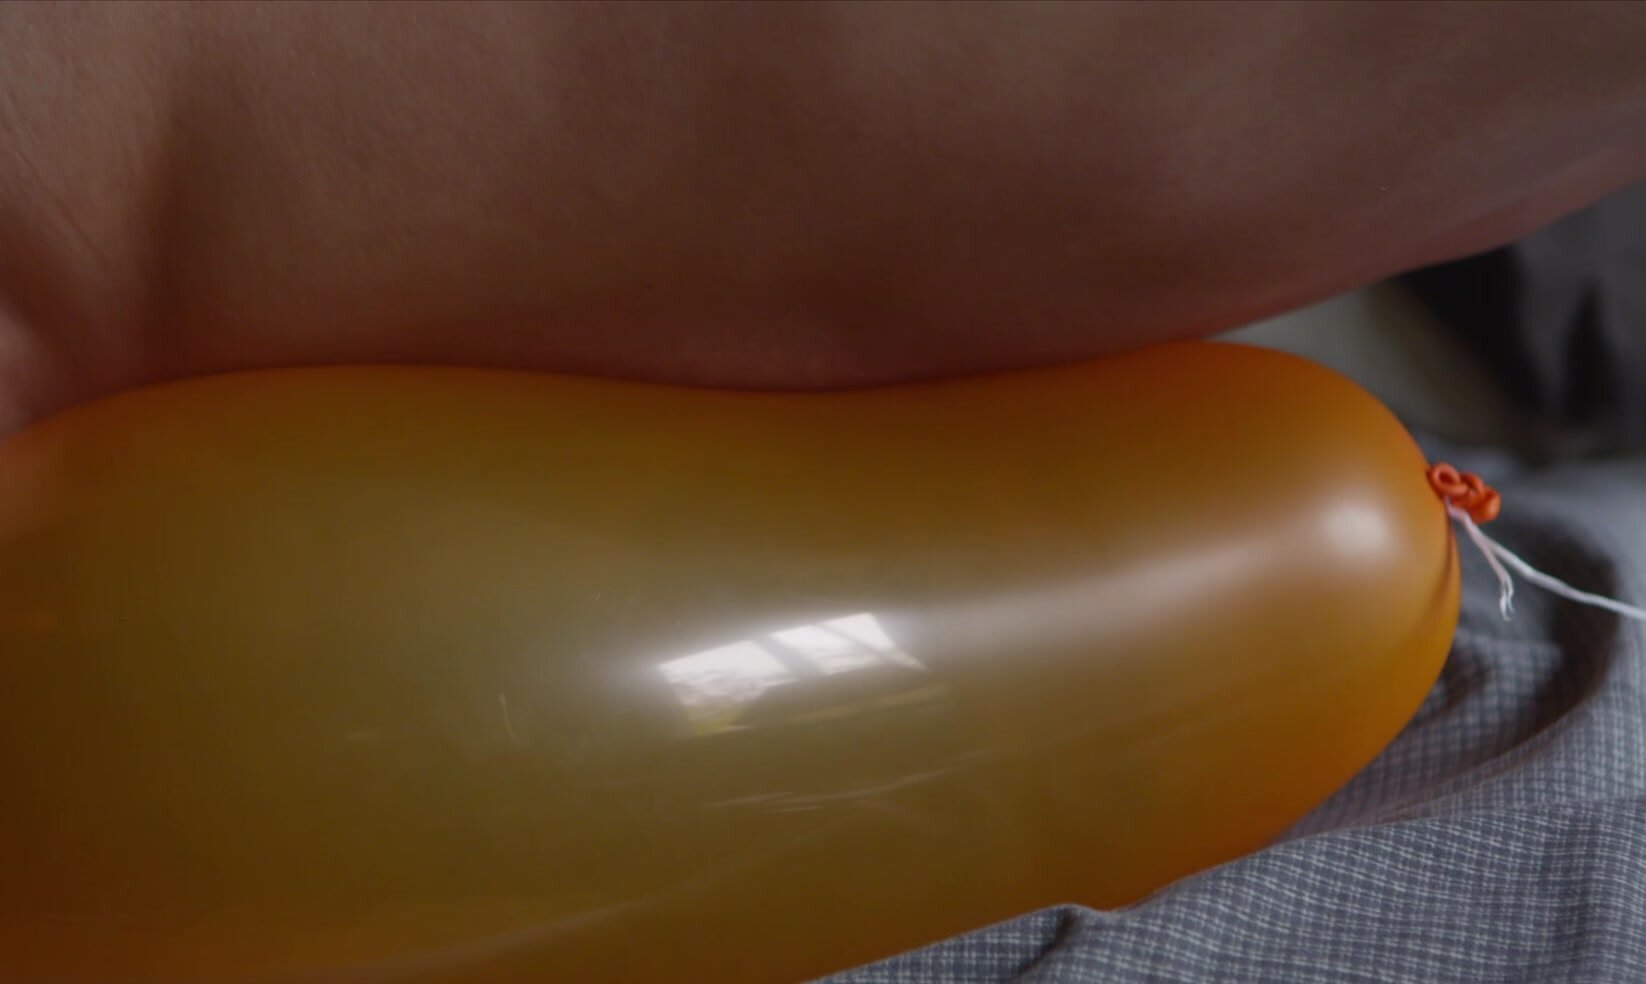 Hot Guy plays with balloon and cums